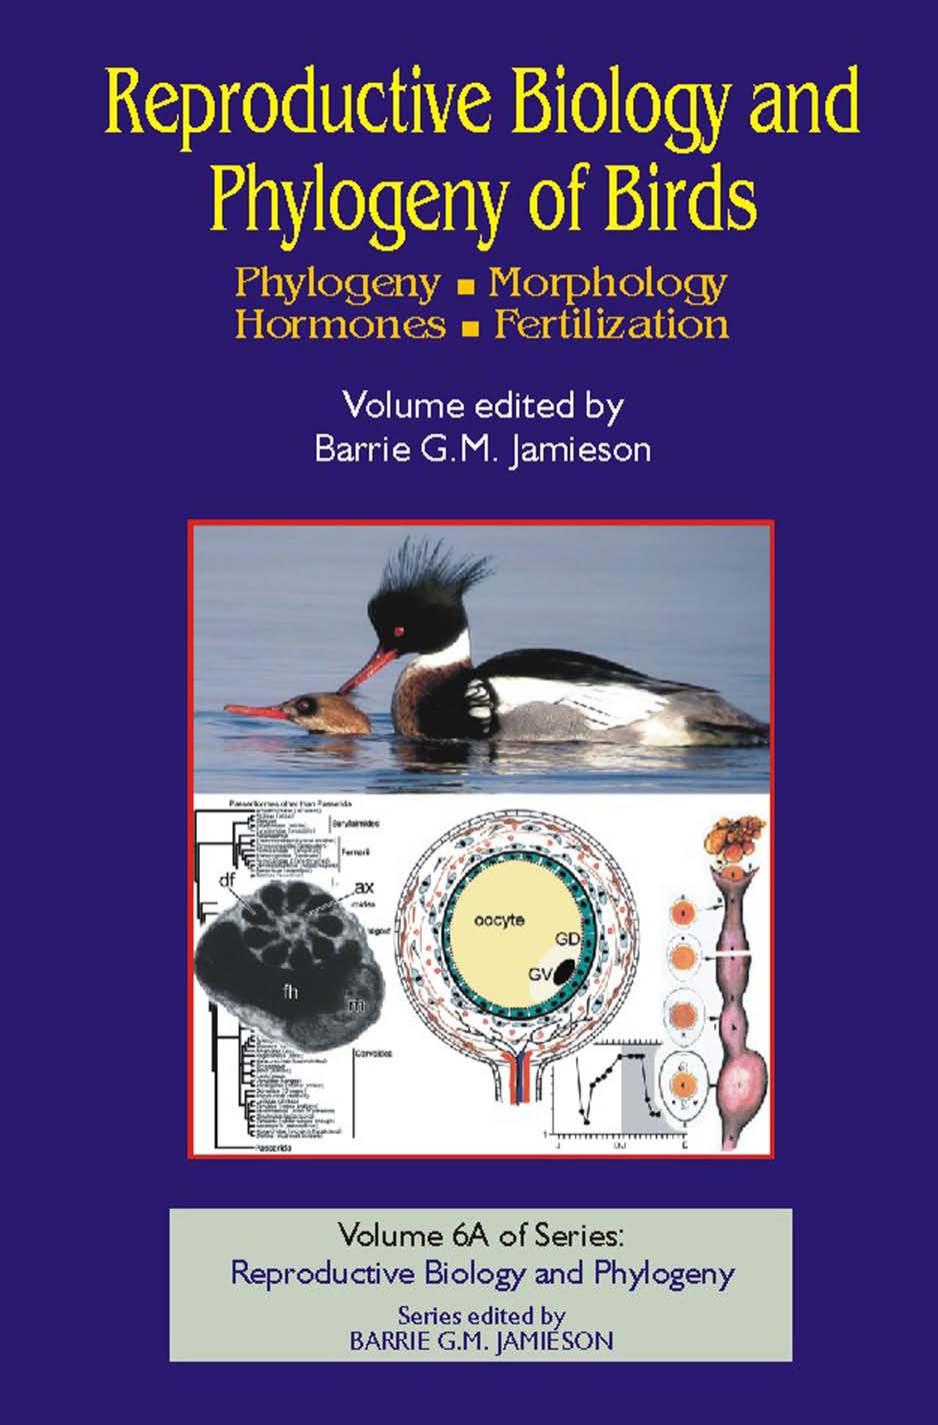 Reproductive Biology and Phylogeny of Birds. Part A, Phylogeny, Morphology, Hormones, Fertilization by Jamieson Barrie G. M